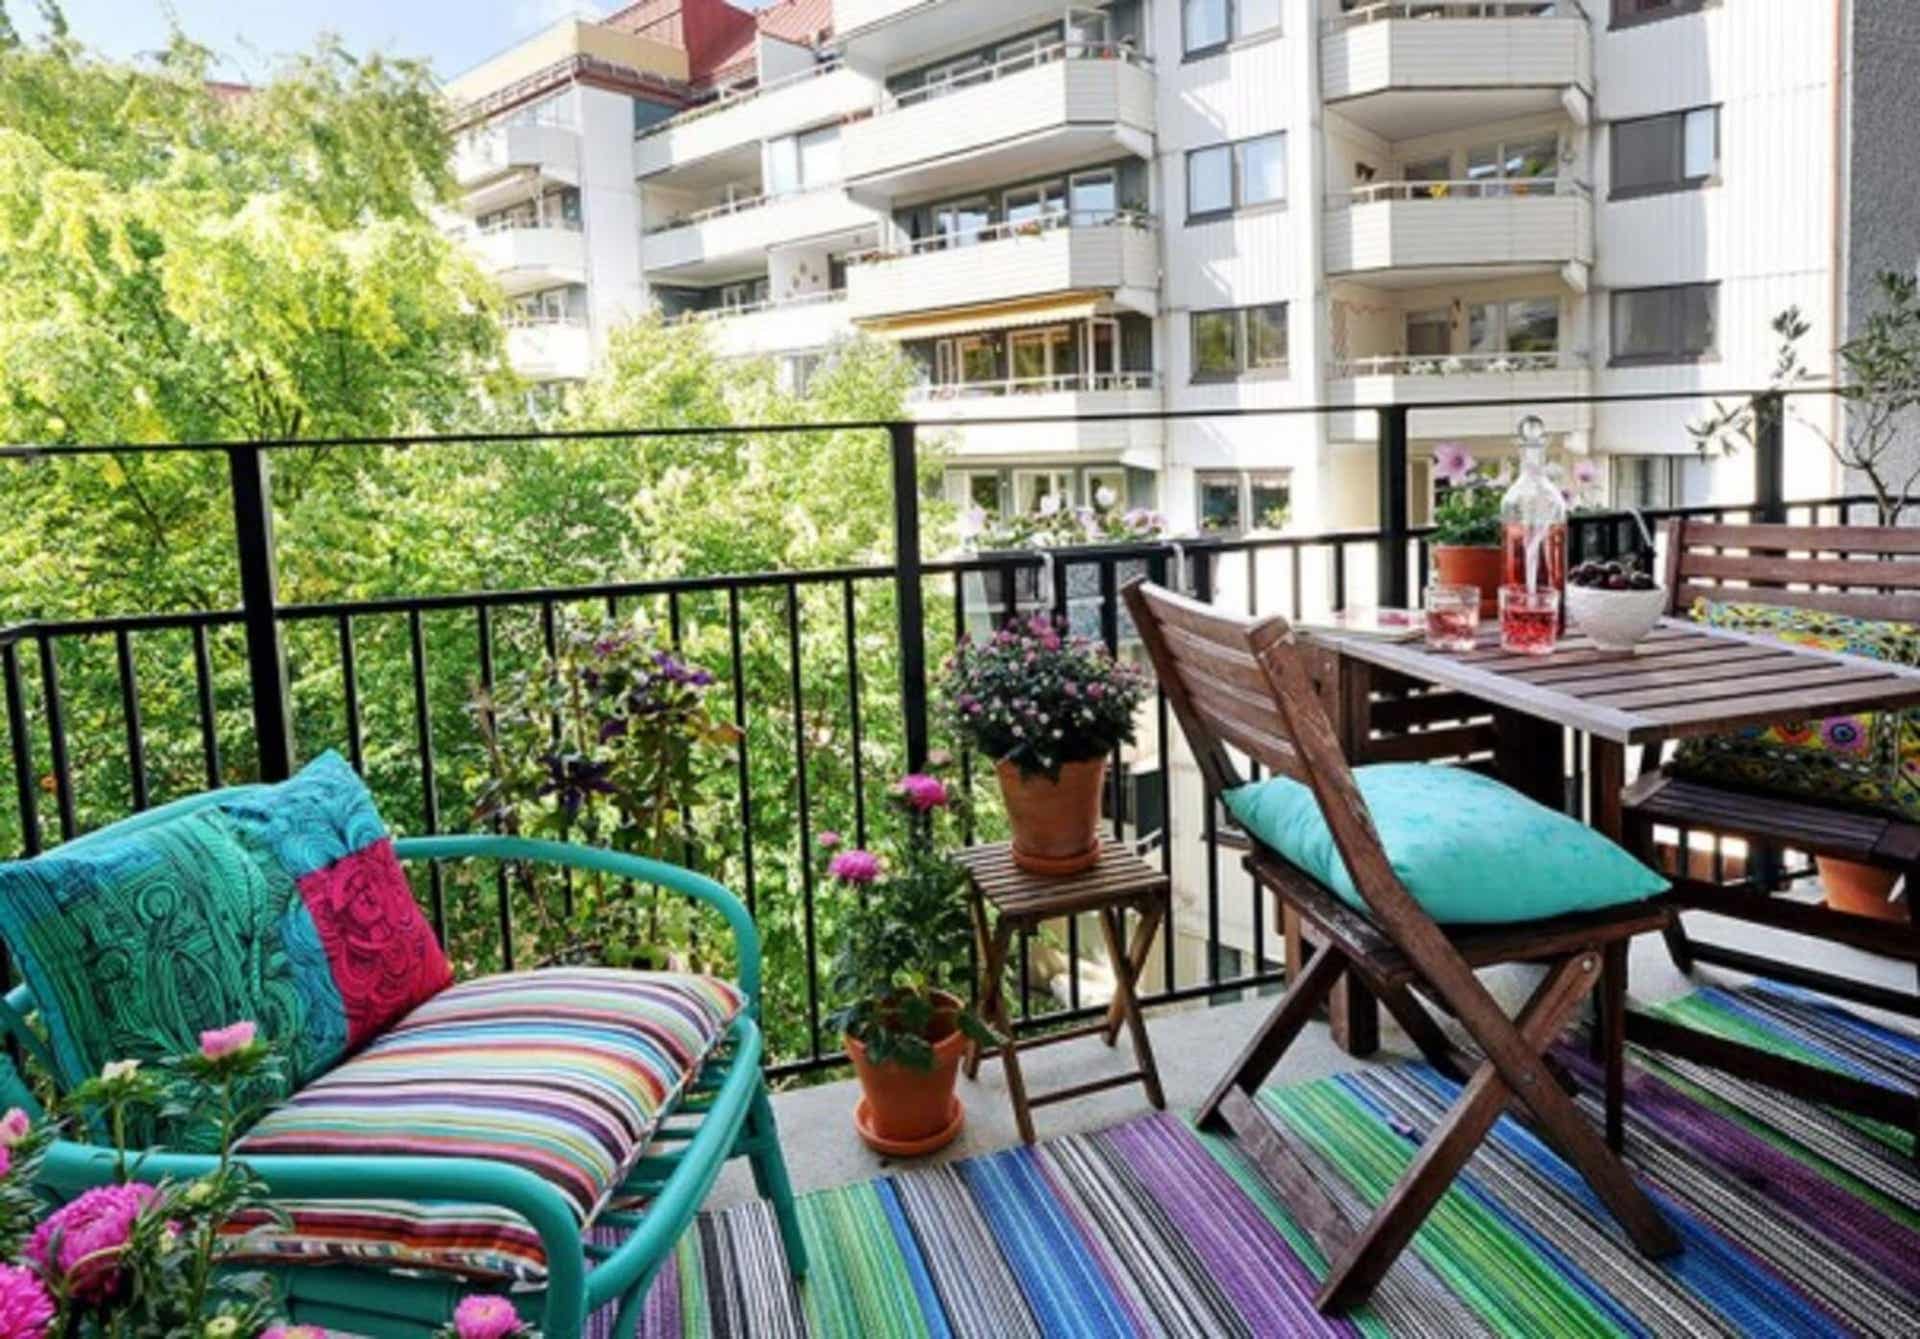 Balcony-for-a-picnic-at-home..jpg